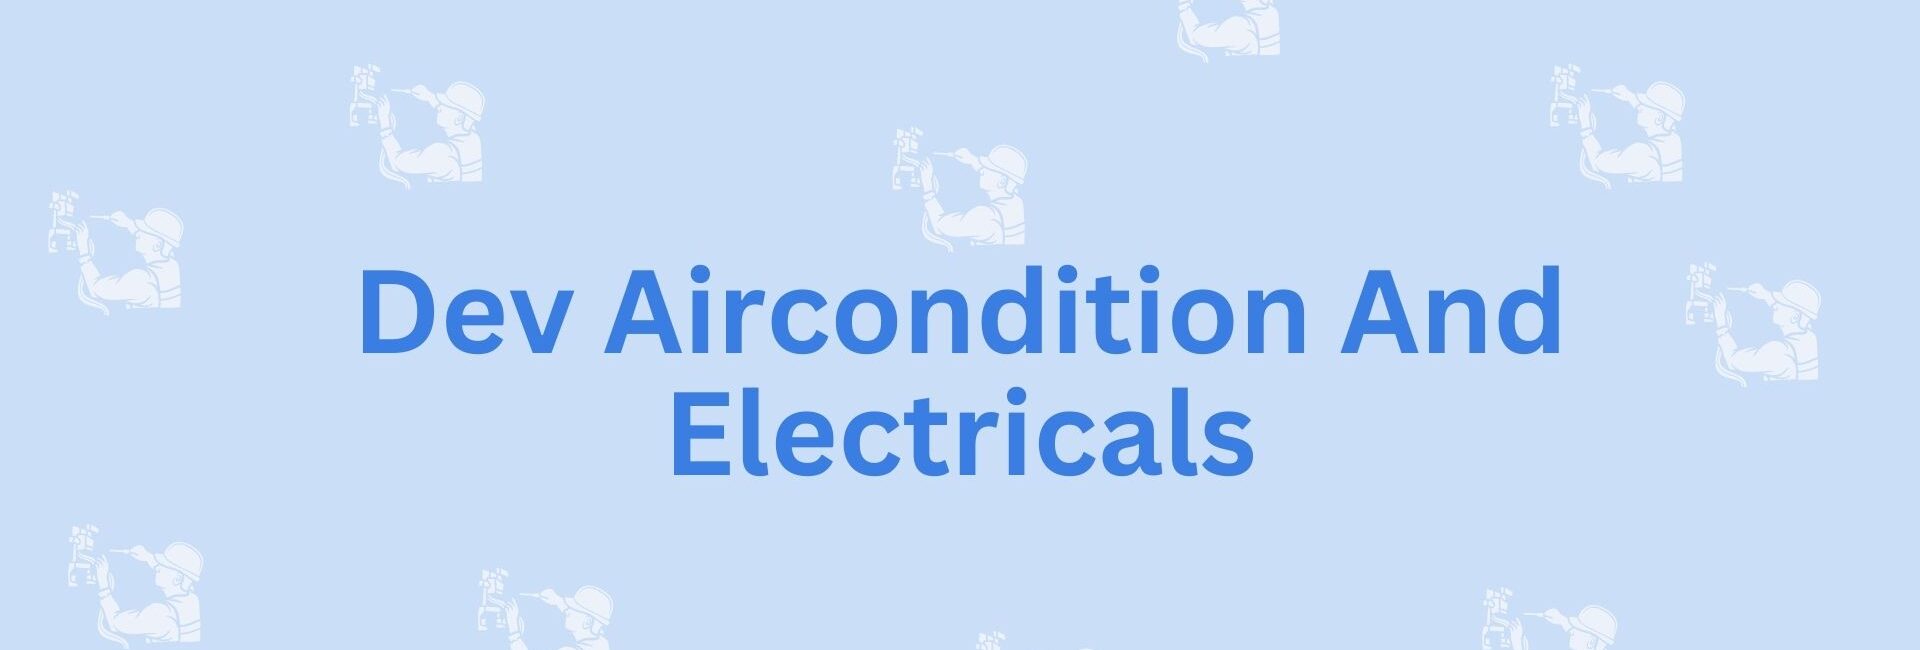 Dev Aircondition And Electricals- Noida's Electrician Service Provider